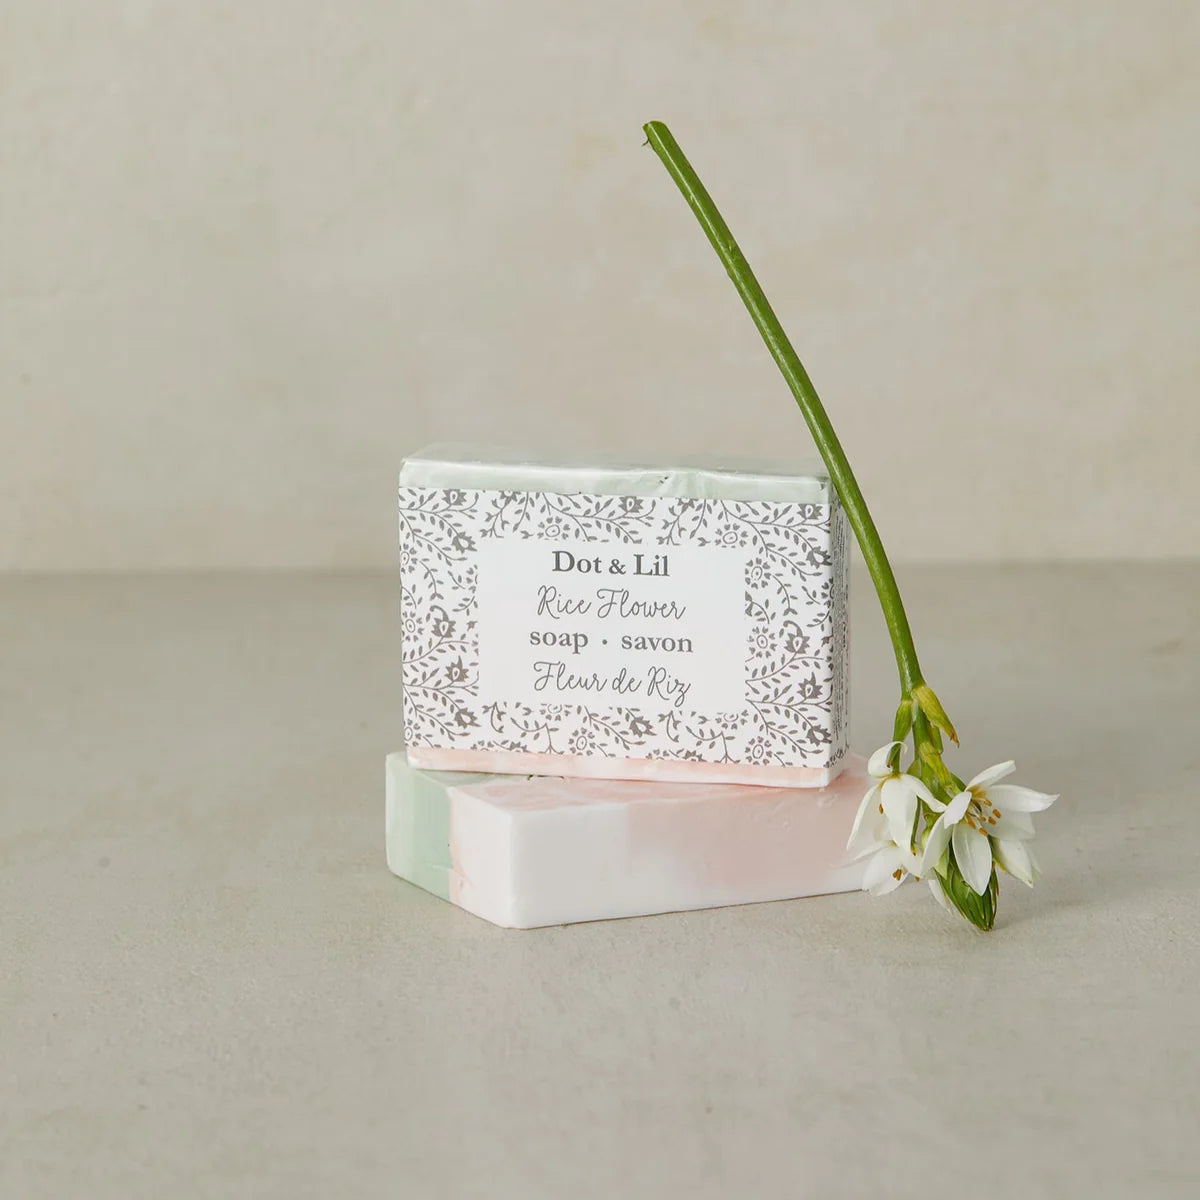 Rice Flower Soap - Dot and Lil